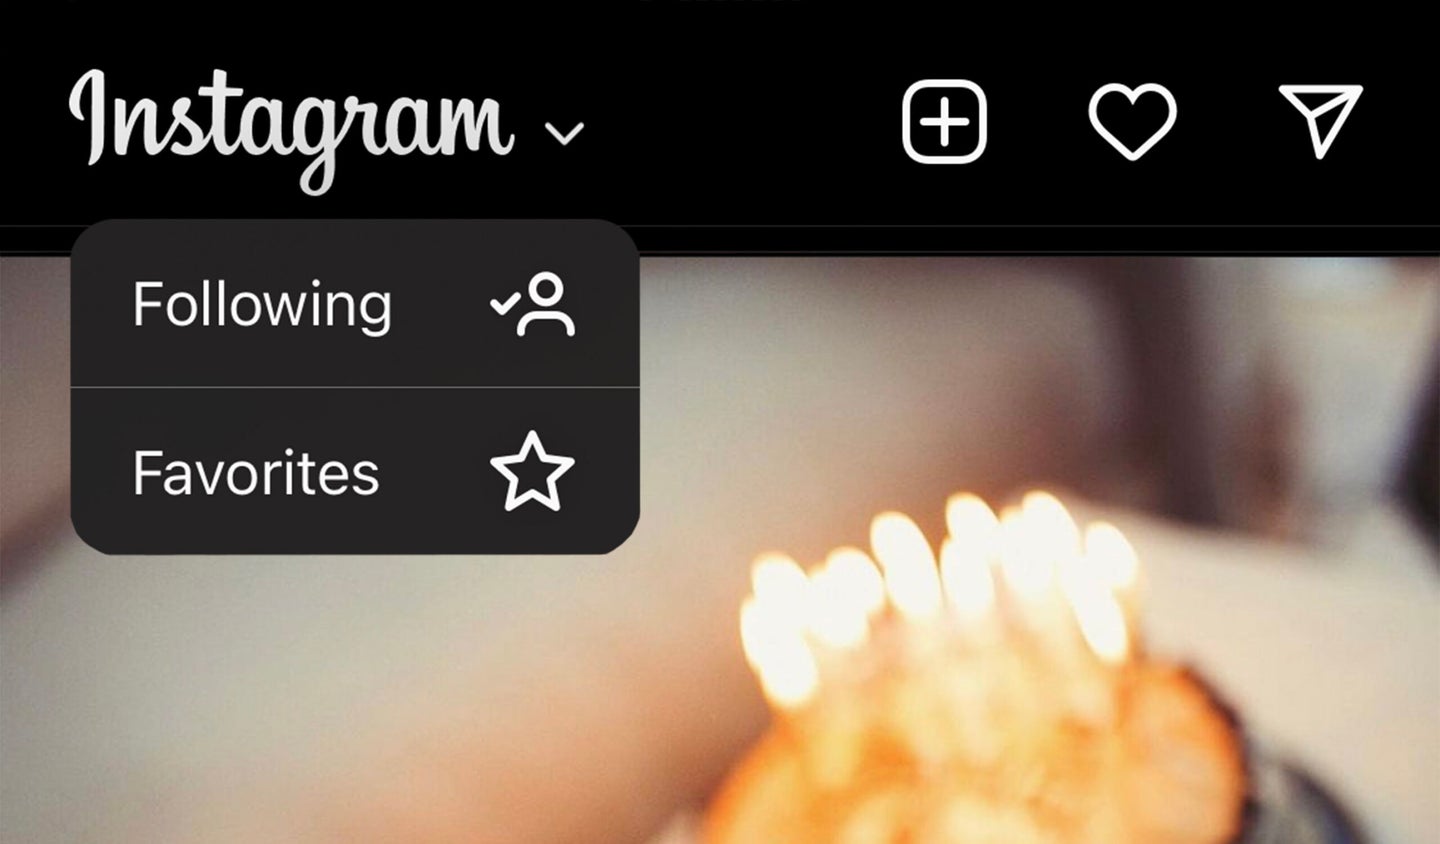 An Instagram screenshot showing new options to view a chronological feed.